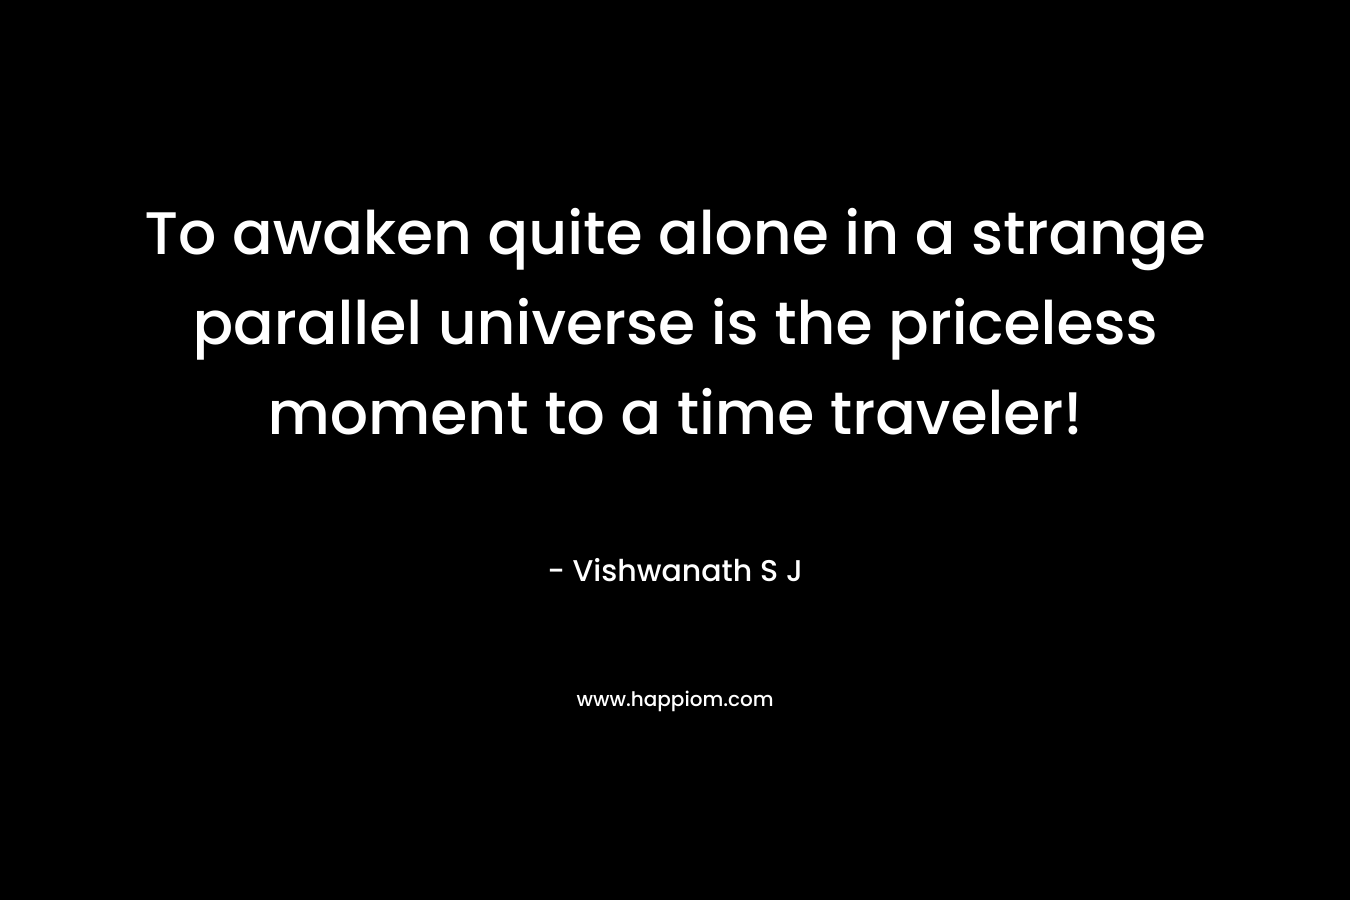 To awaken quite alone in a strange parallel universe is the priceless moment to a time traveler!